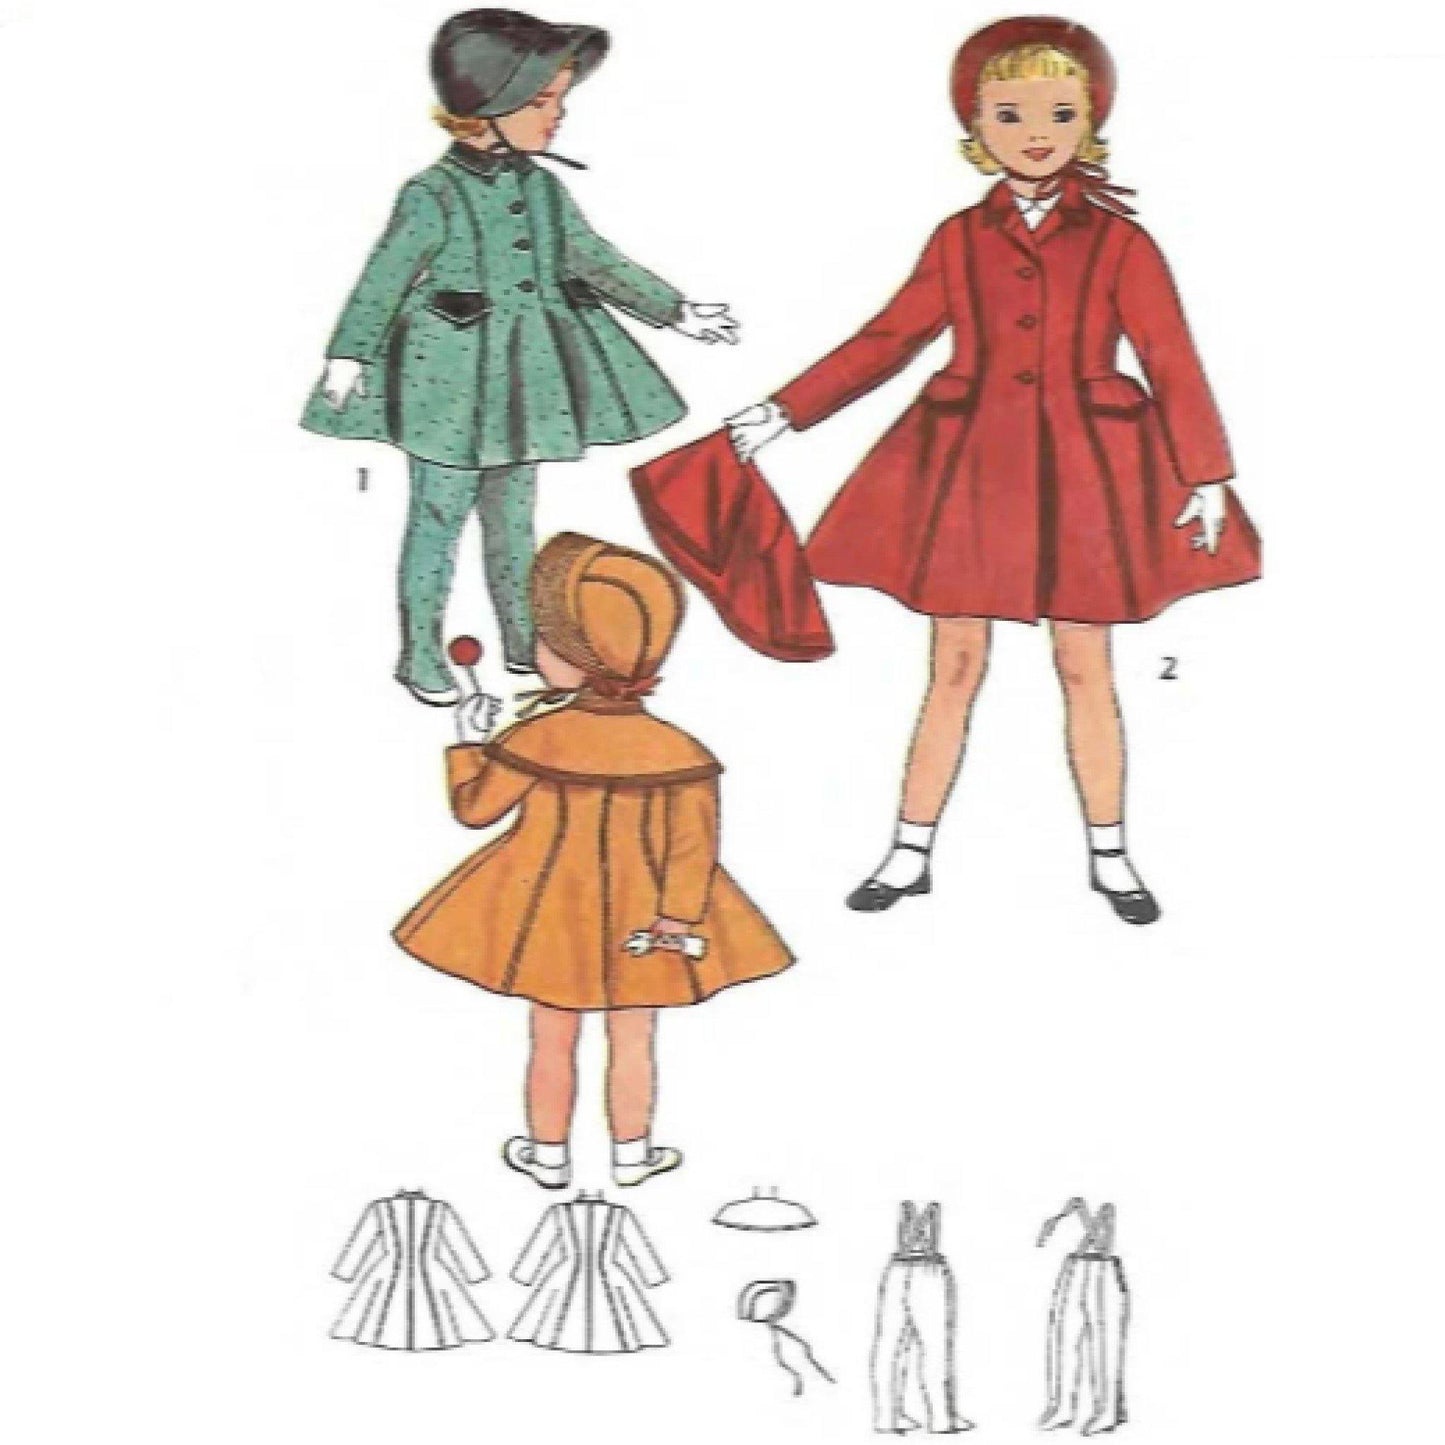 Little girl's coat with fitted bodice and princess seams. Notched collar that can button hu to neck and pockets with pointed flaps. The coat has a 4 buttn closing. A detachable cape and pretty bonnet with brim which ties under the chin in a bow. Leggins with braises that cross over at the back.